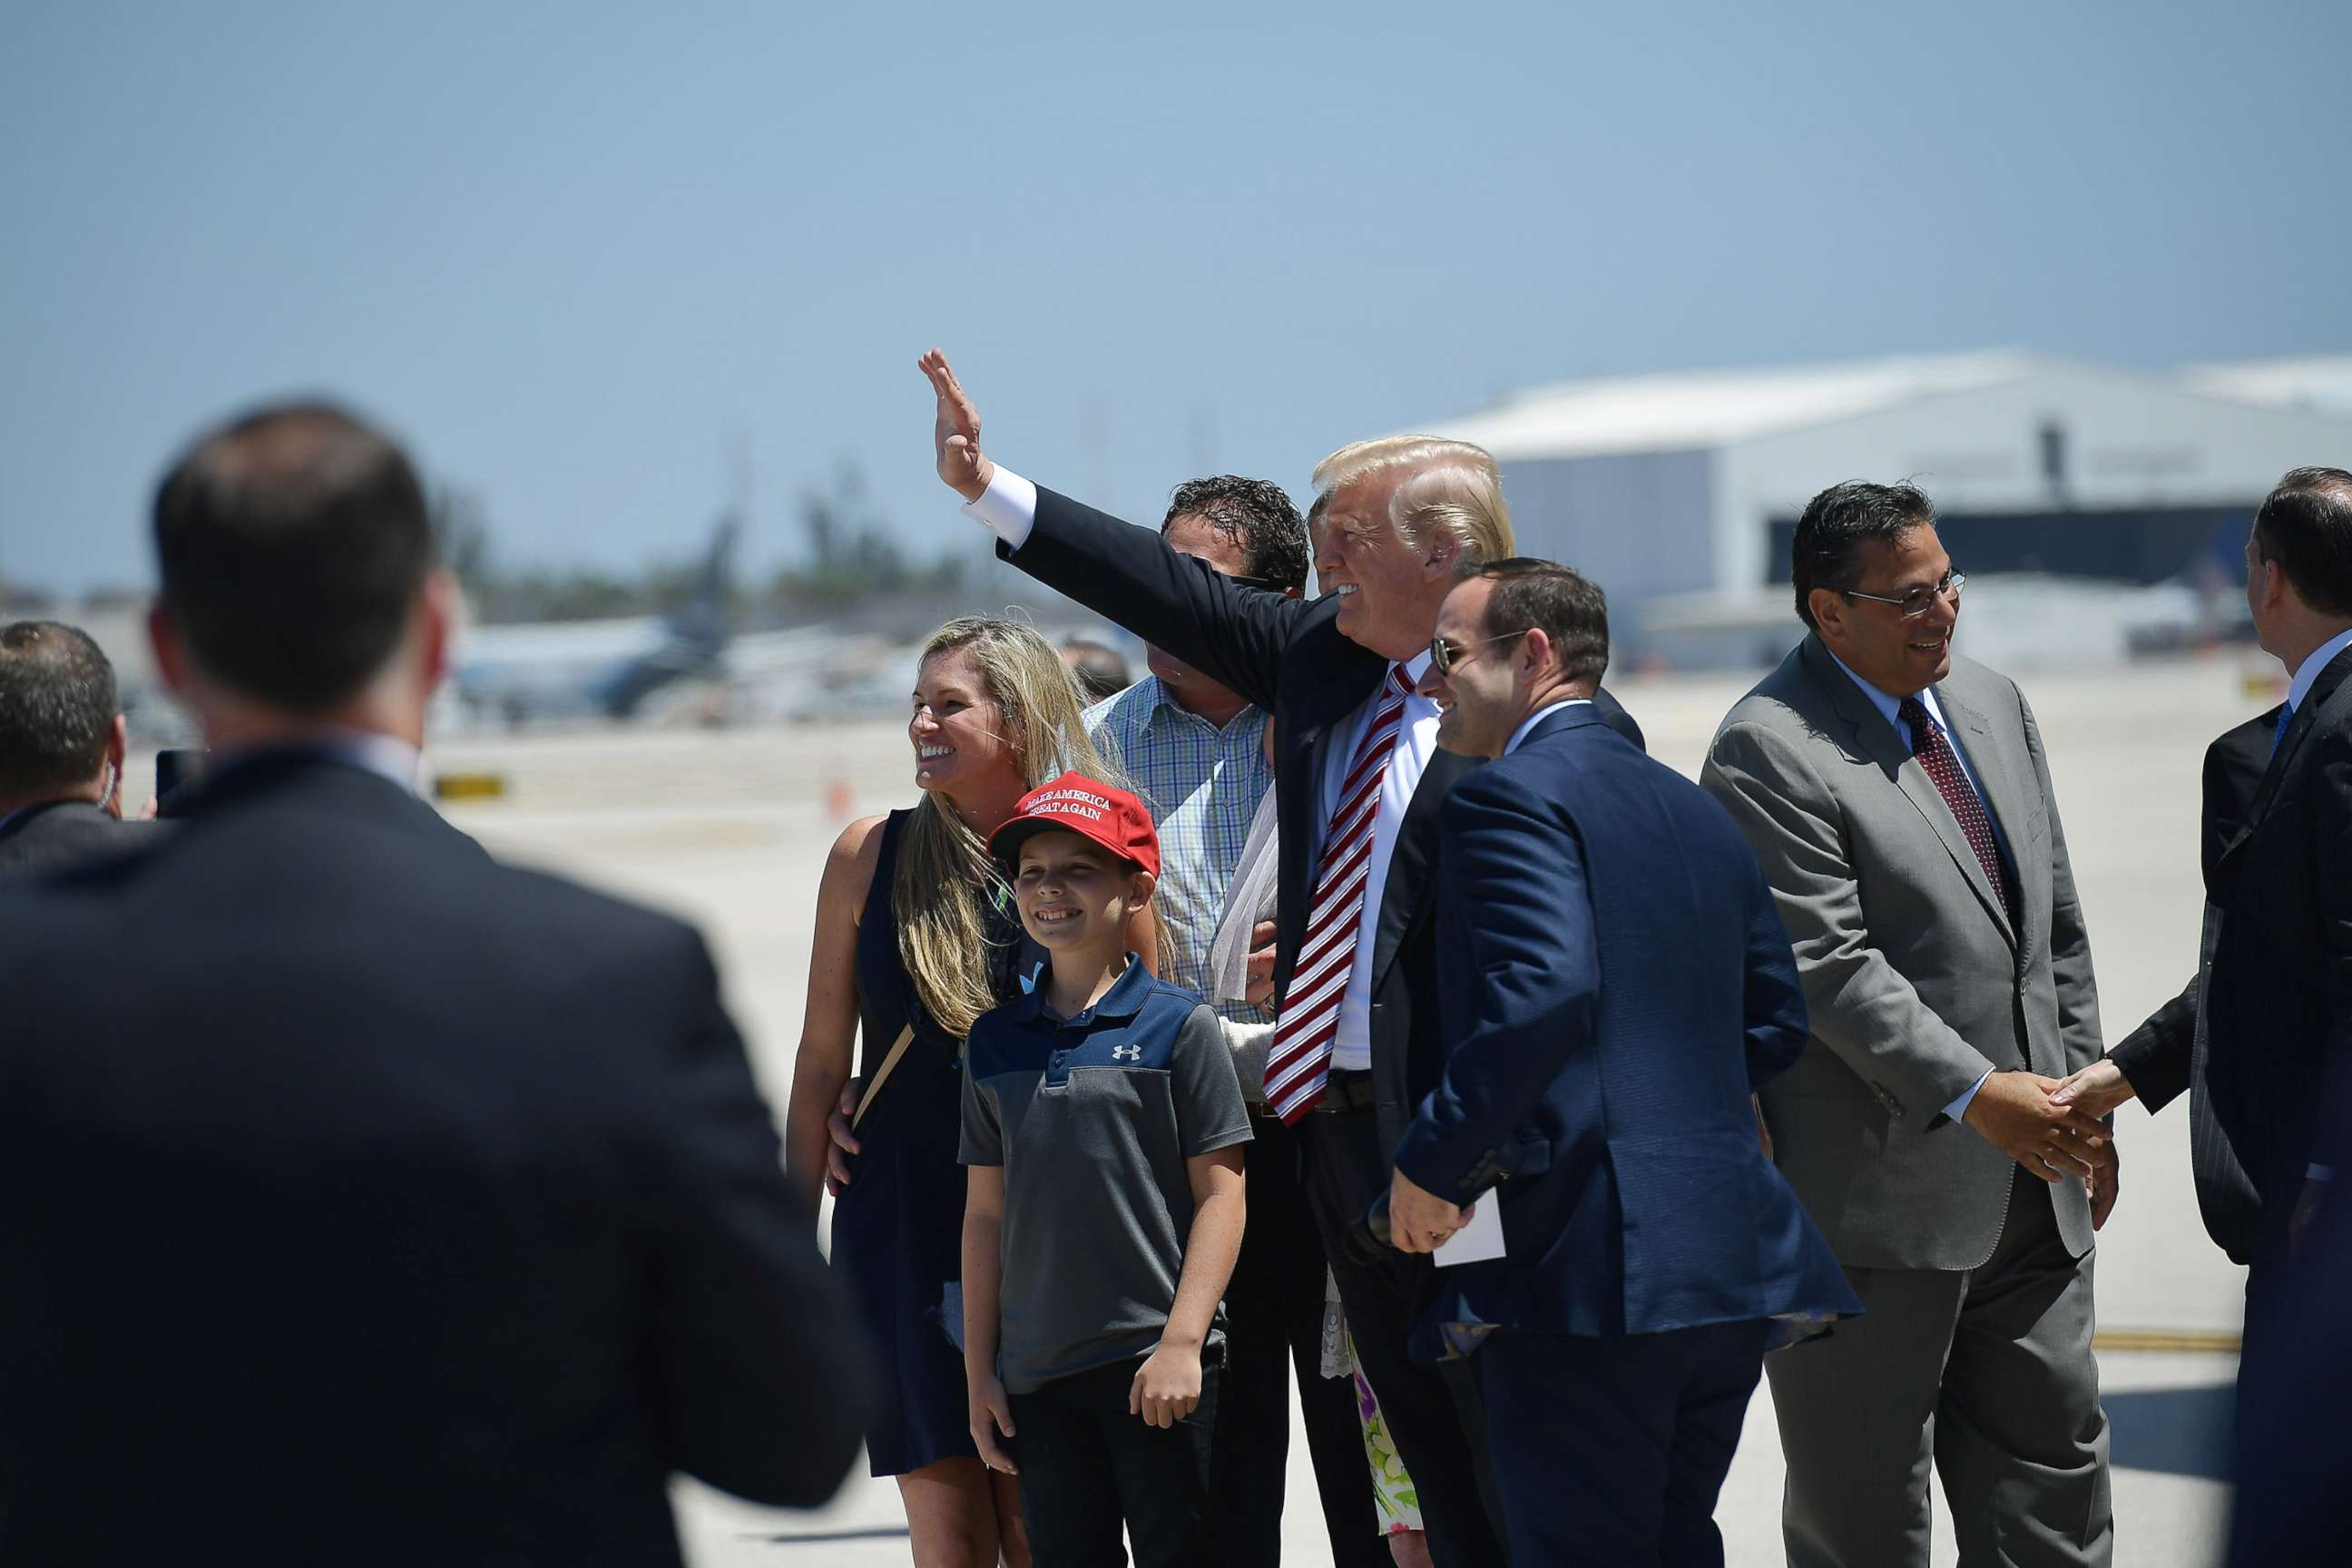 PHOTO: President Donald Trump waves as he steps off Air Force One upon arrival at Miami International Airport in Miami on April 16, 2018.